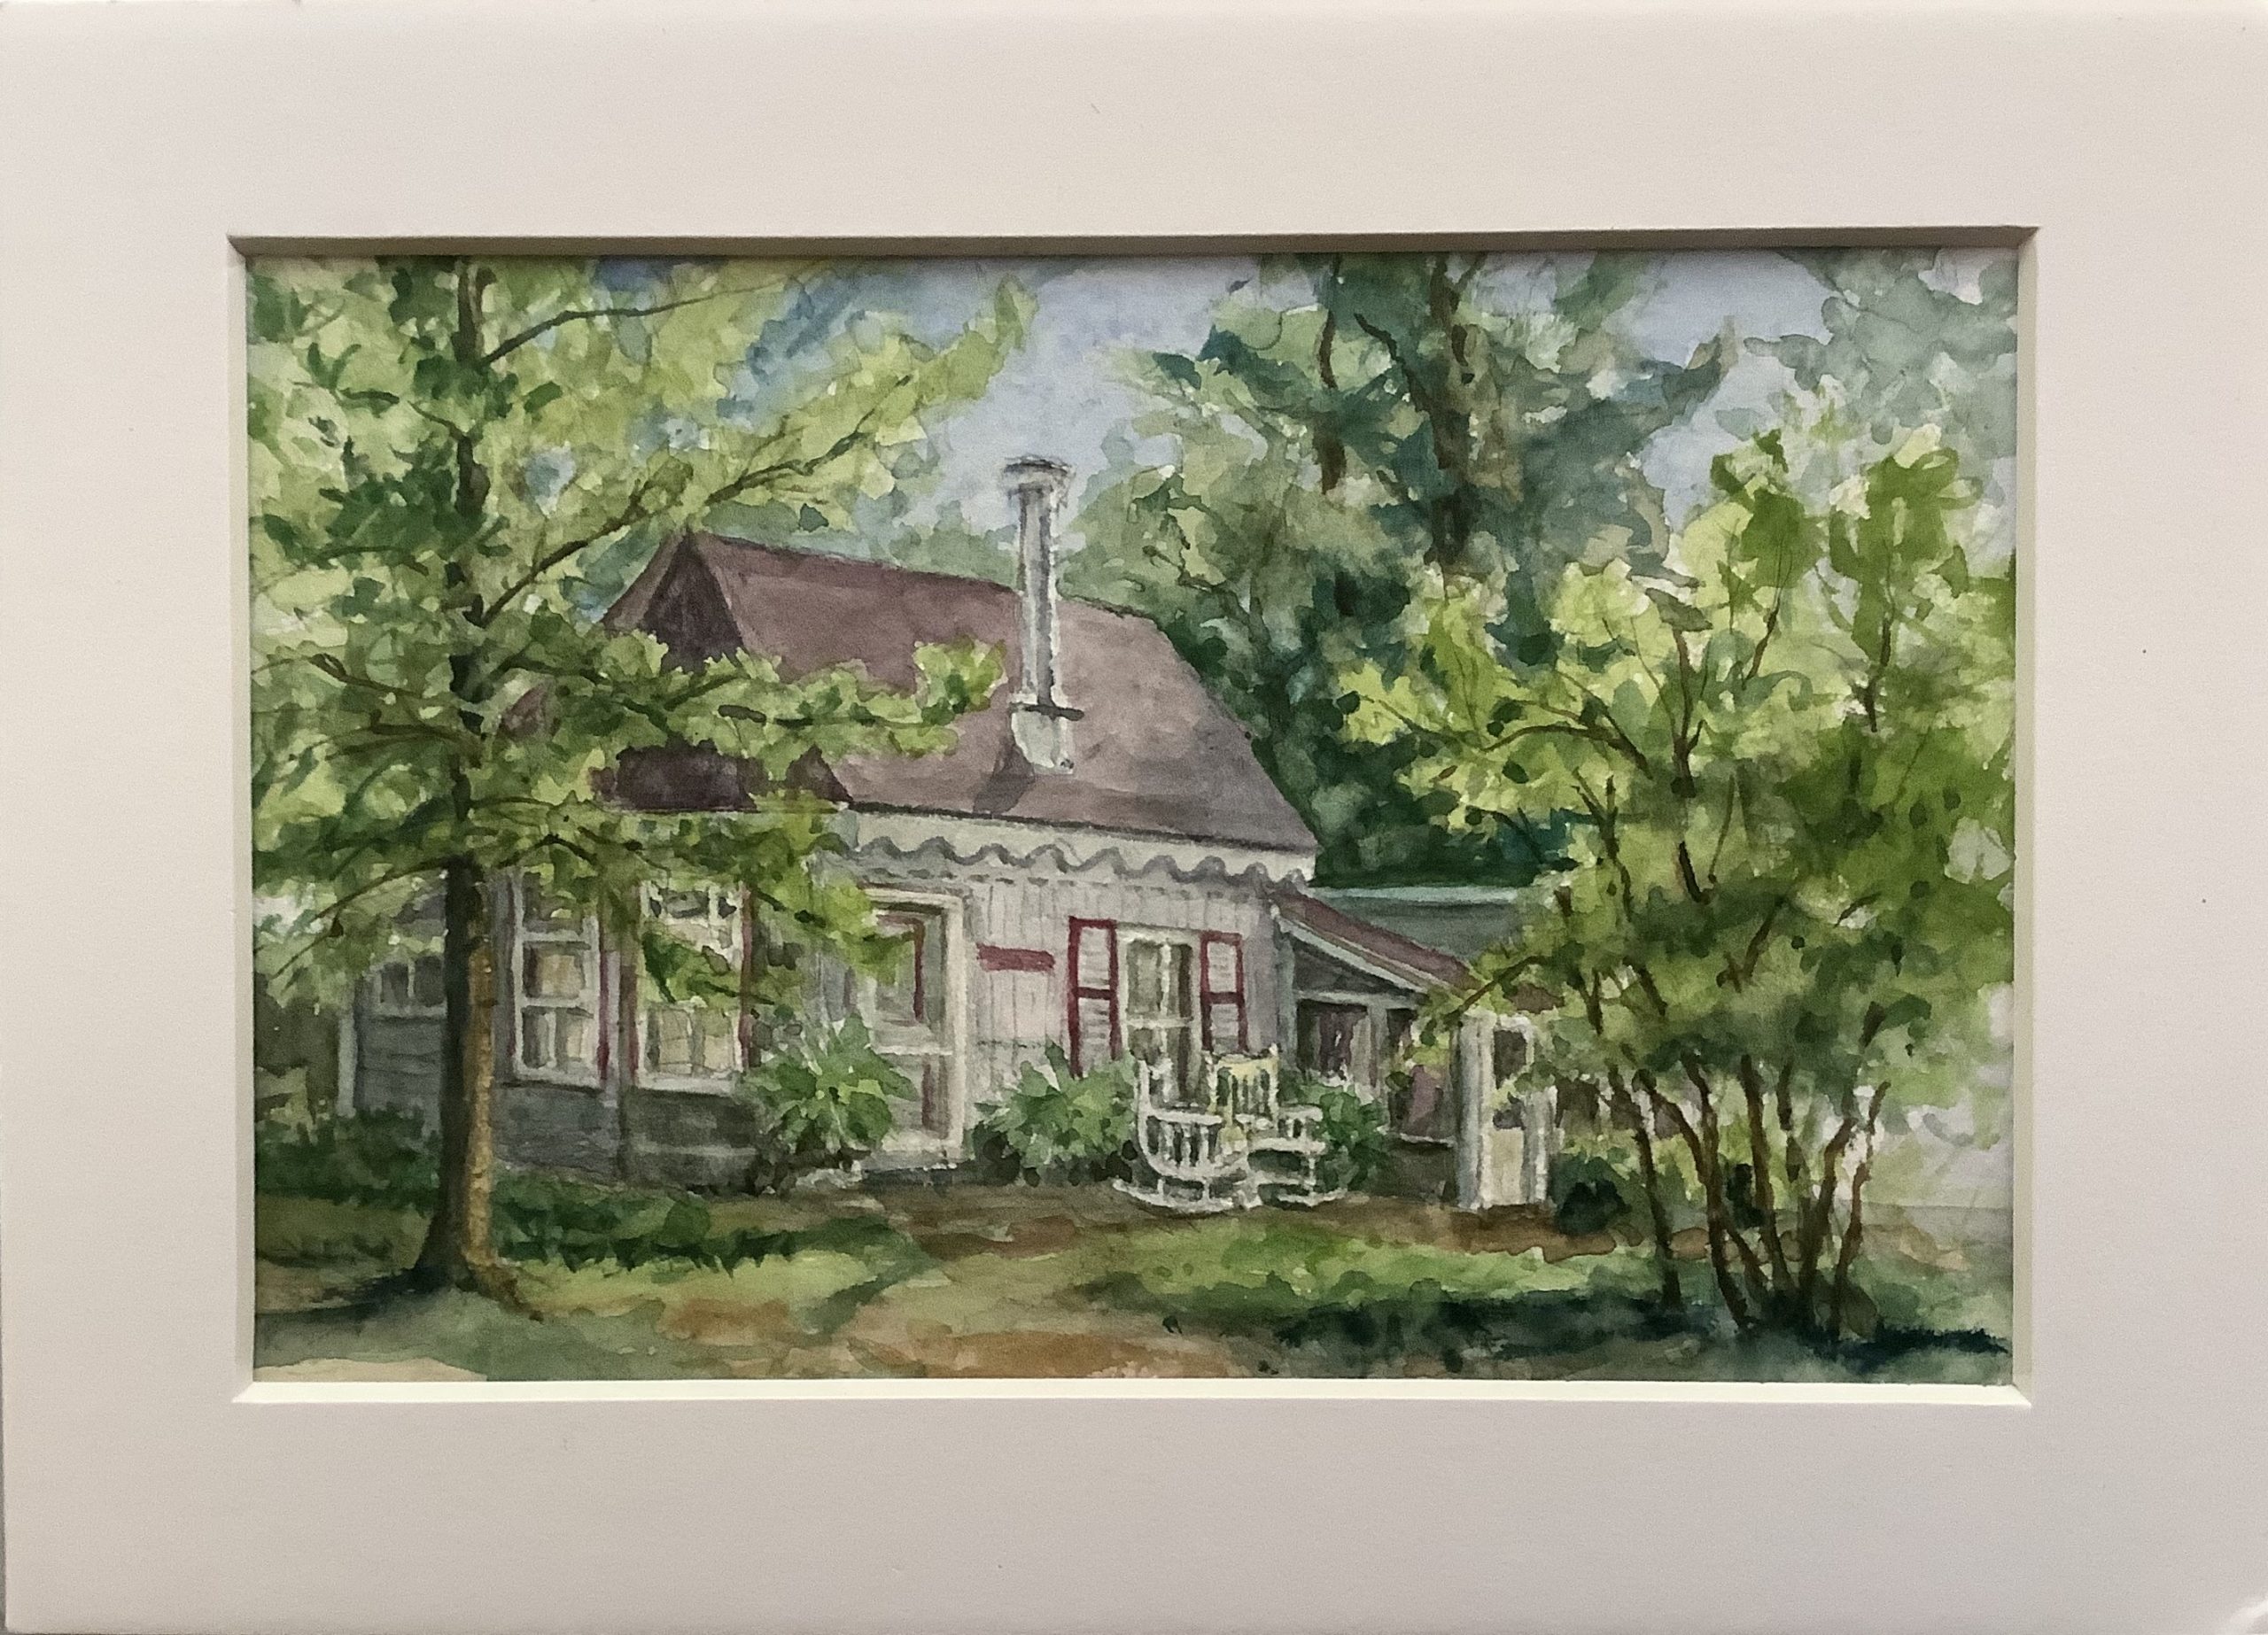 Image of cottage surrounded by trees